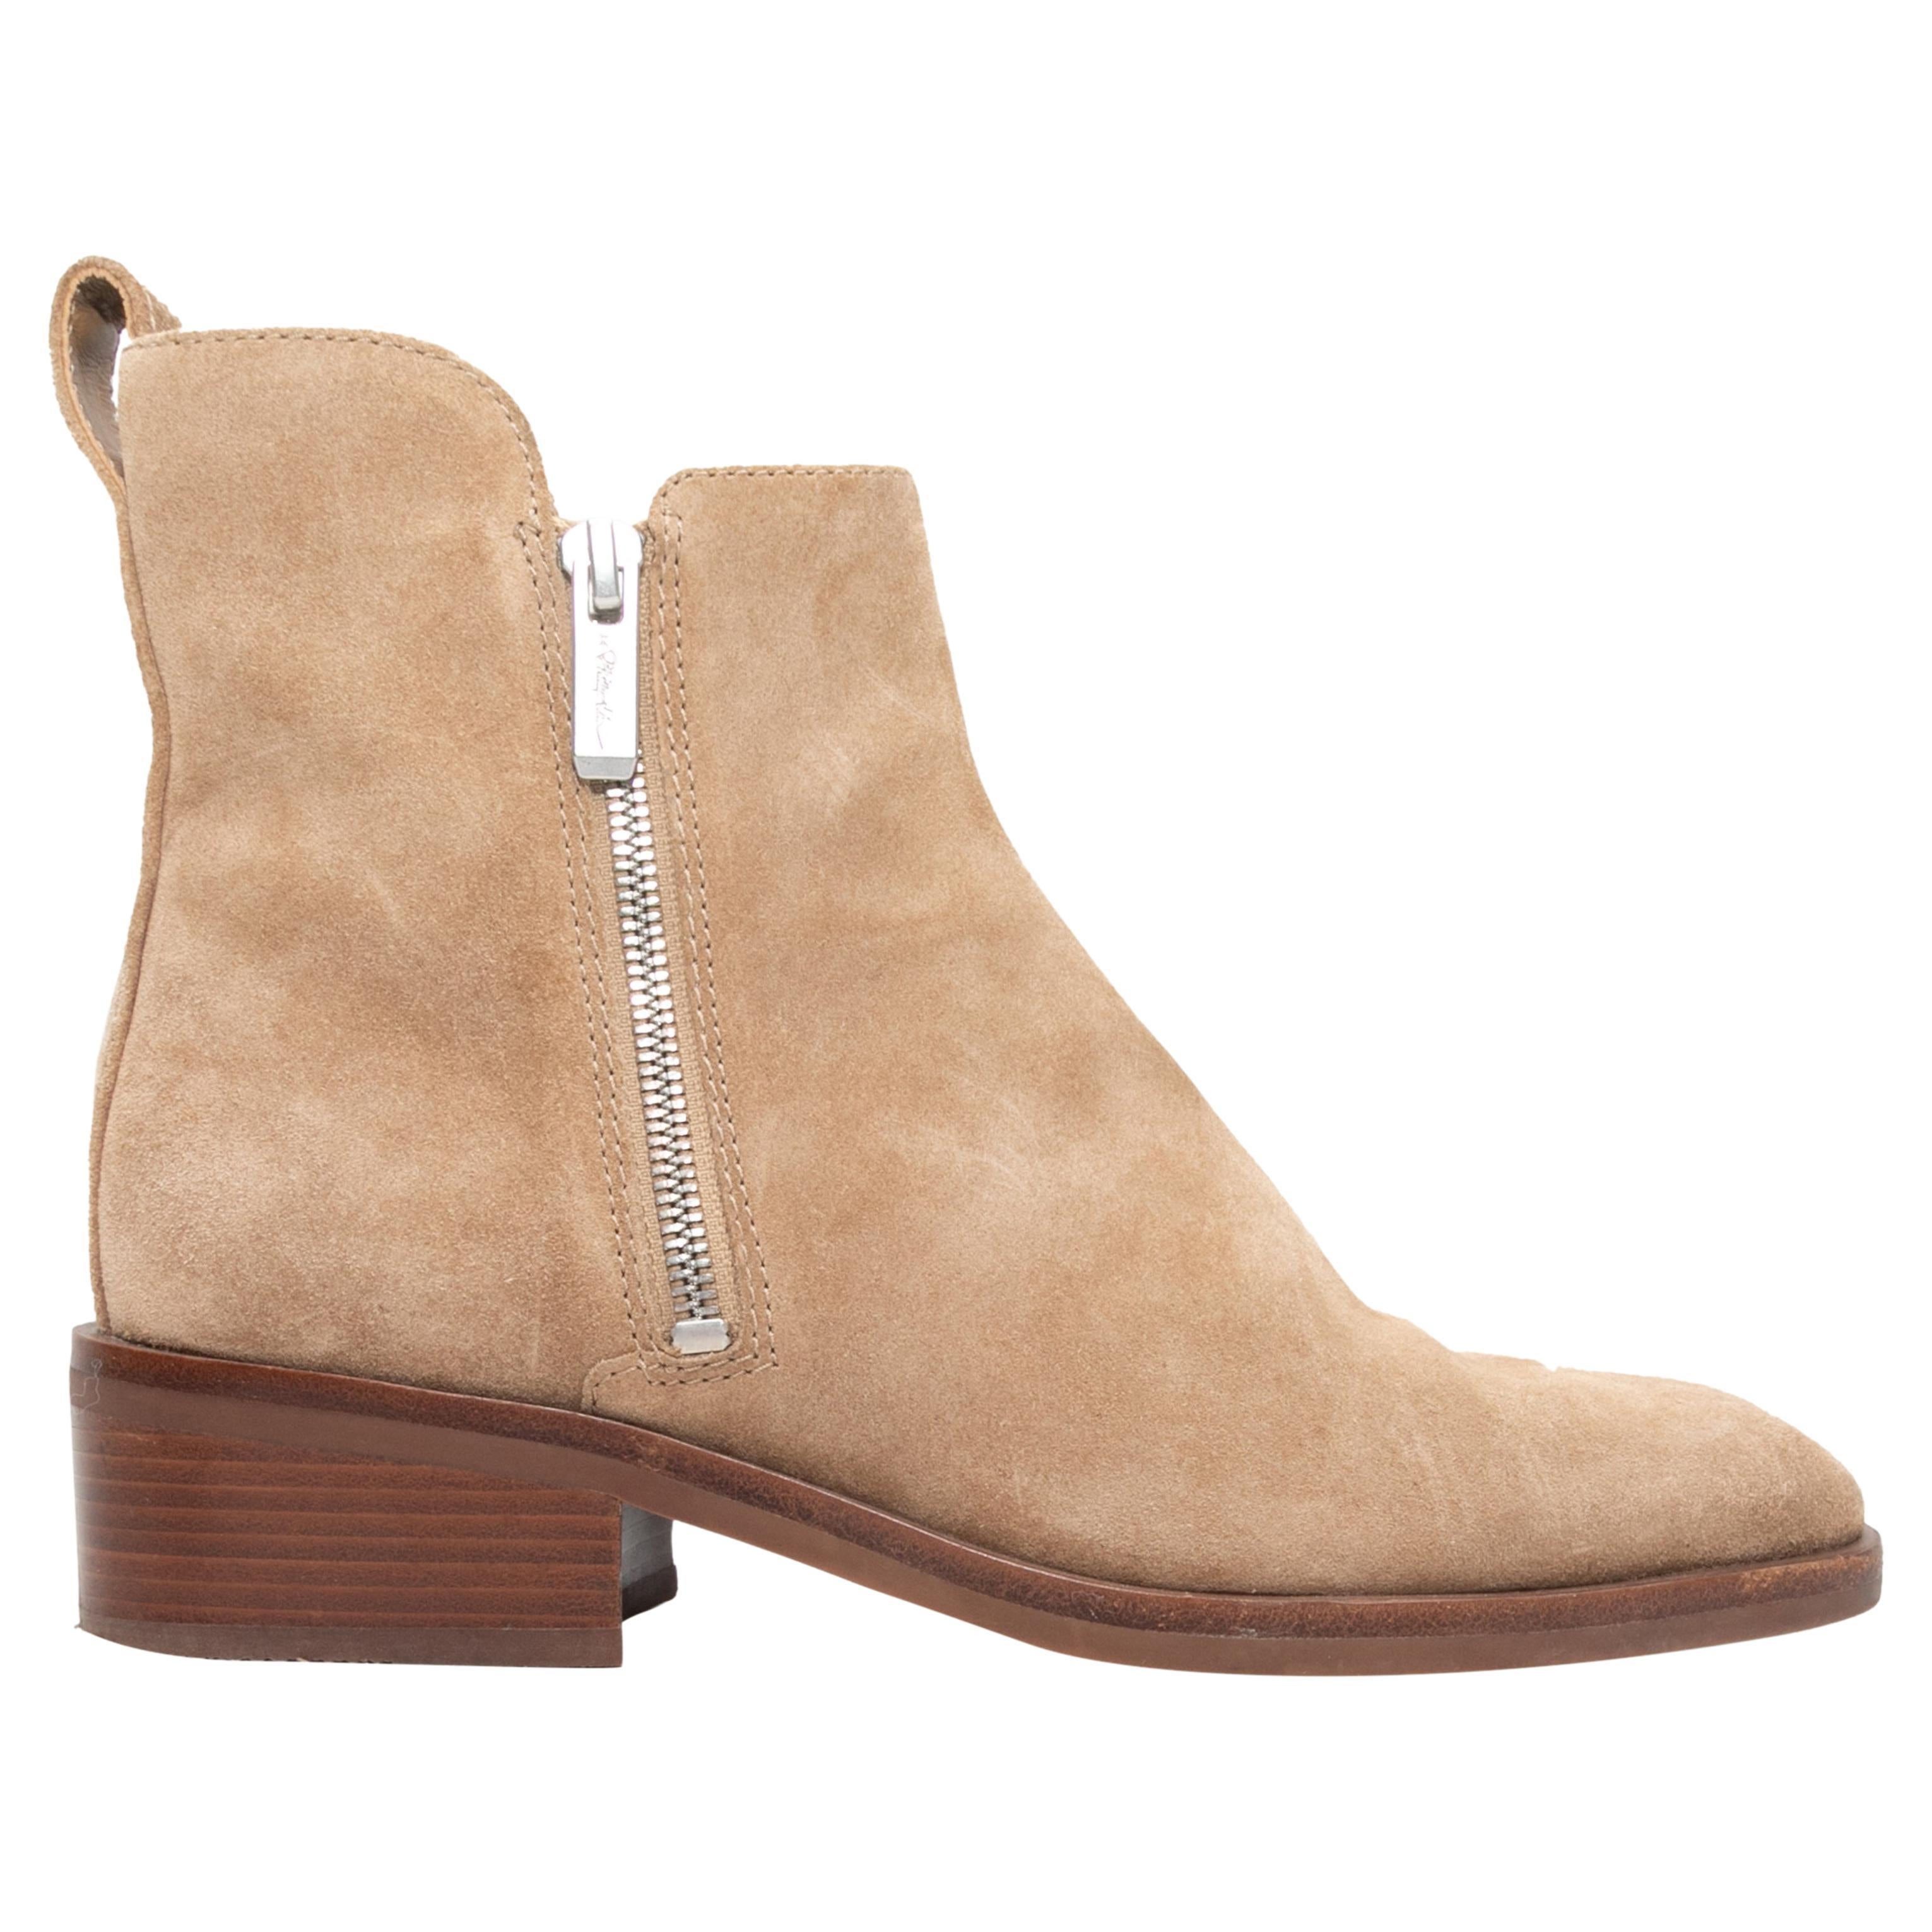 Beige 3.1 Phillip Lim Suede Ankle Boots Size 38.5 For Sale